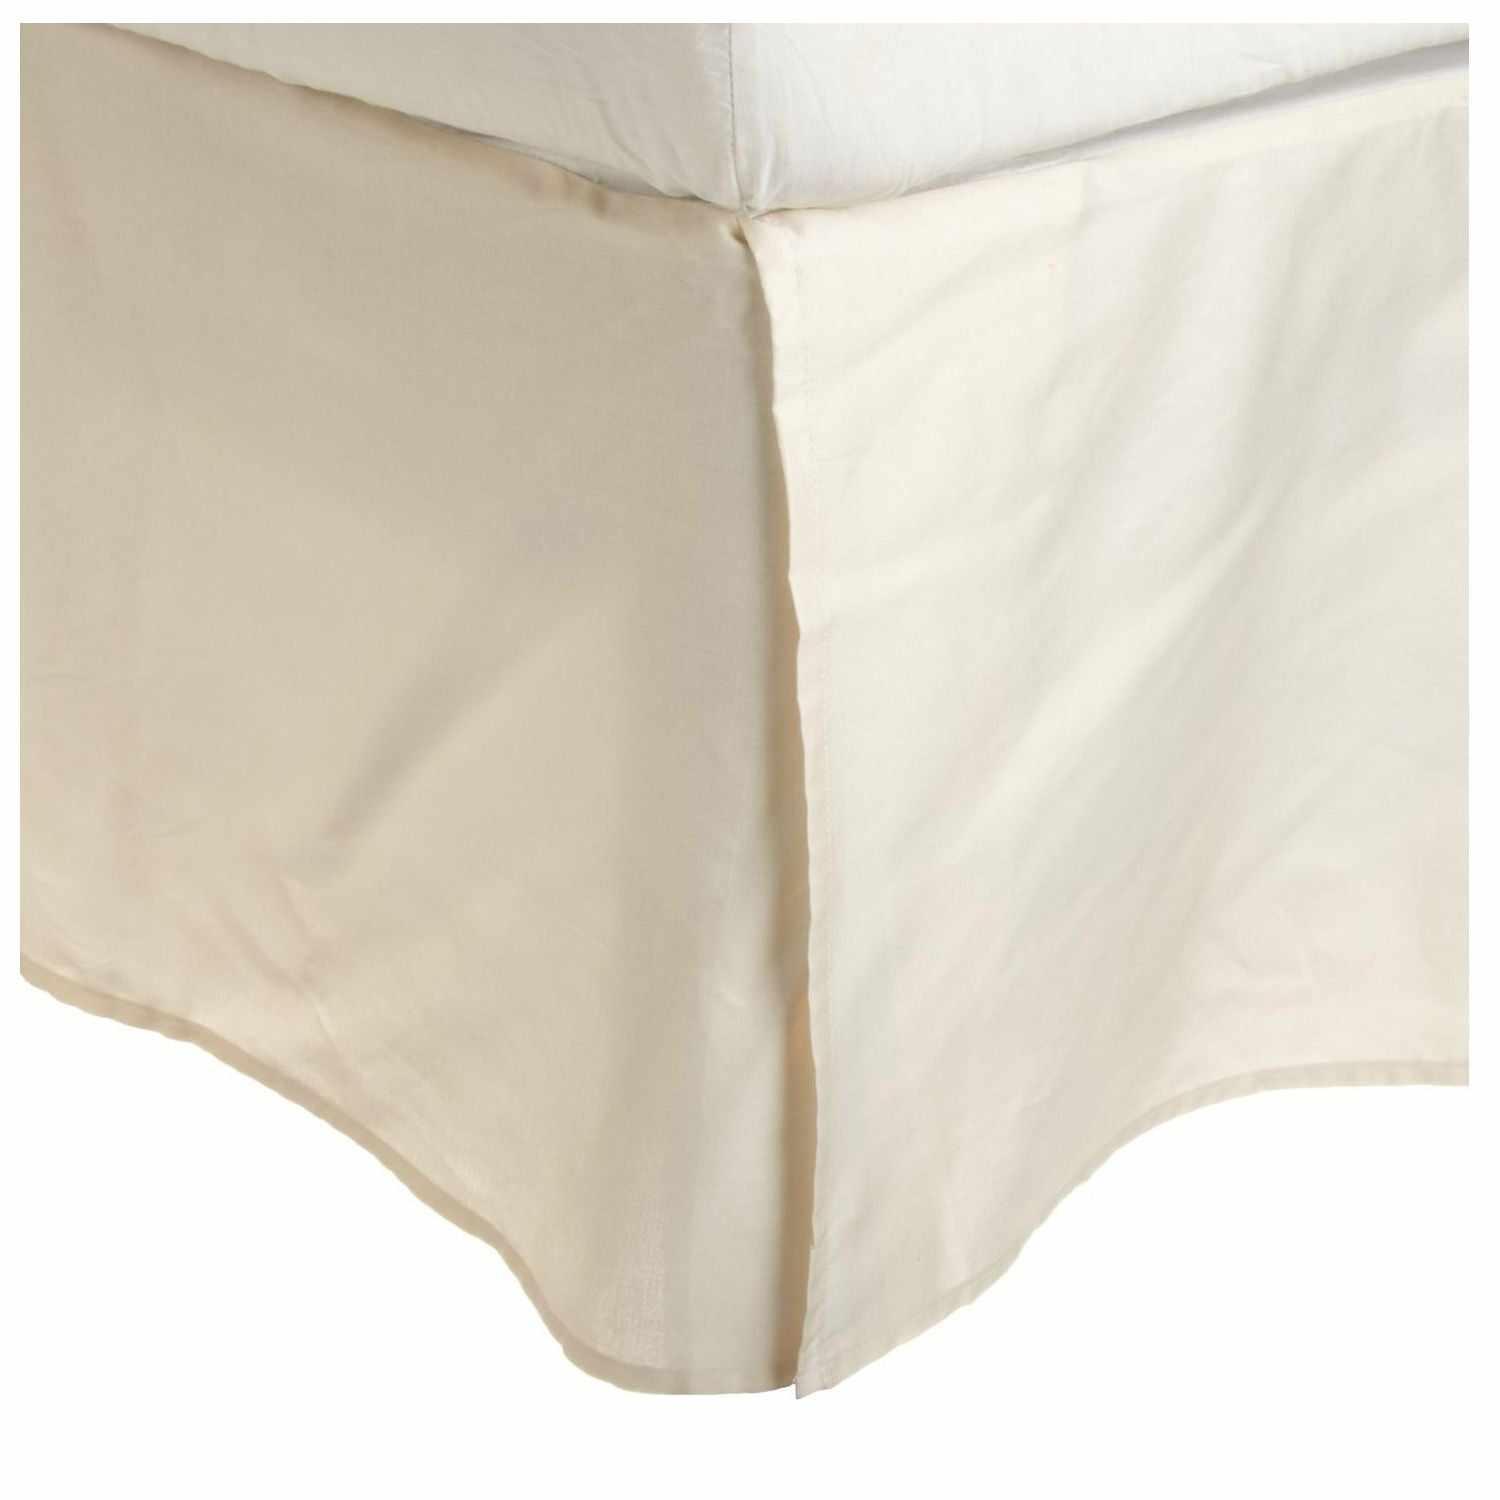 Cotton 15 Inch Drop Bed Skirt - Ivory